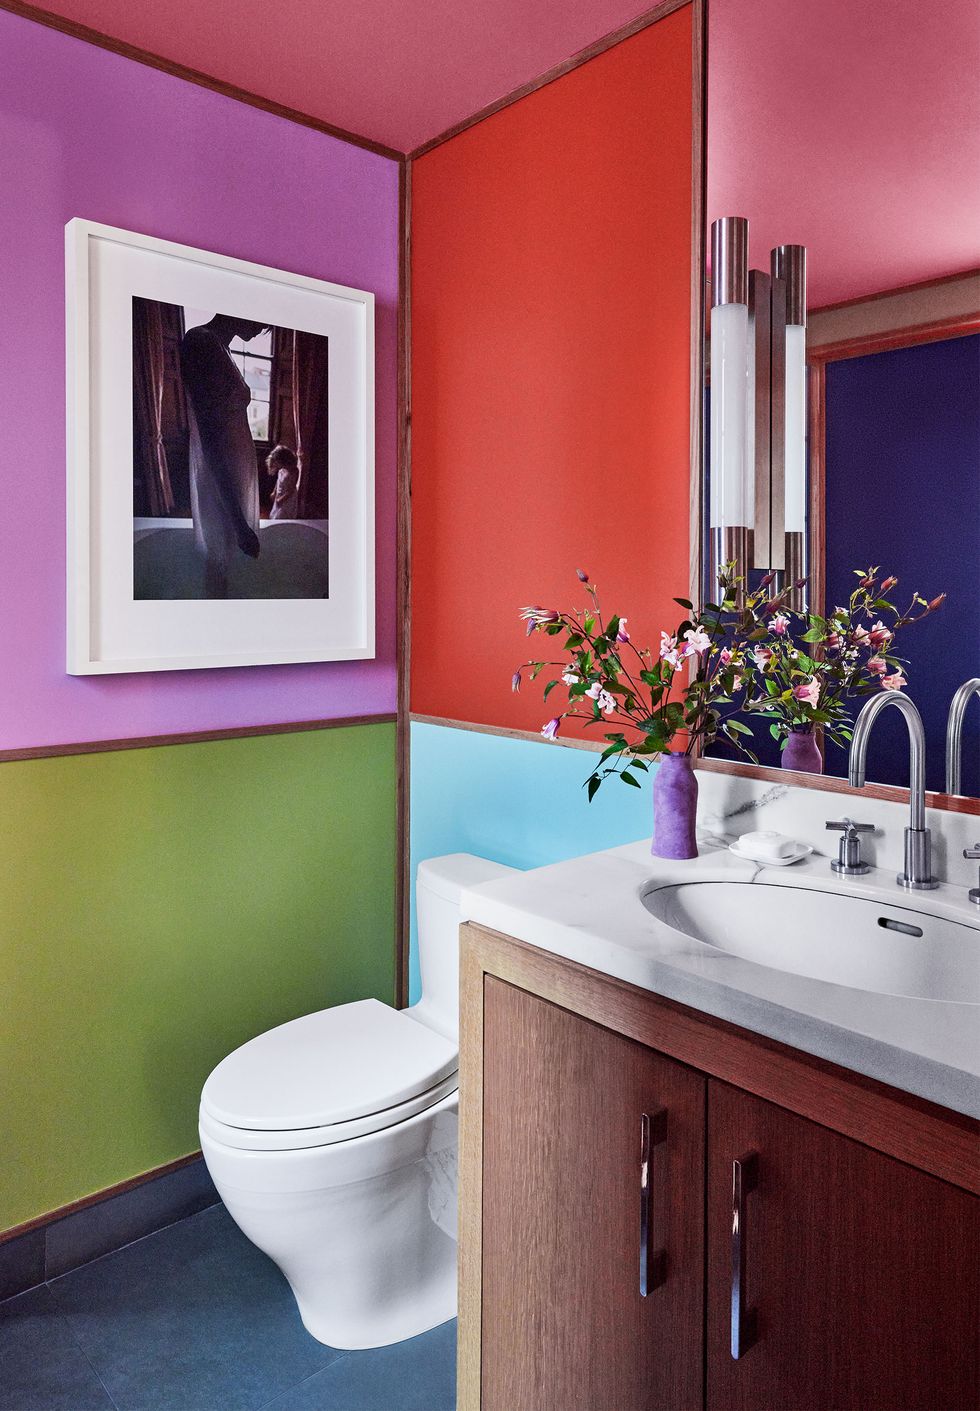 a bathroom has walls and ceiling in blocked colors of olive green, light blue, red, plum, and deep pink, a white marble vanity with wood doors, a mirror above vanity and a framed photograph on the wall